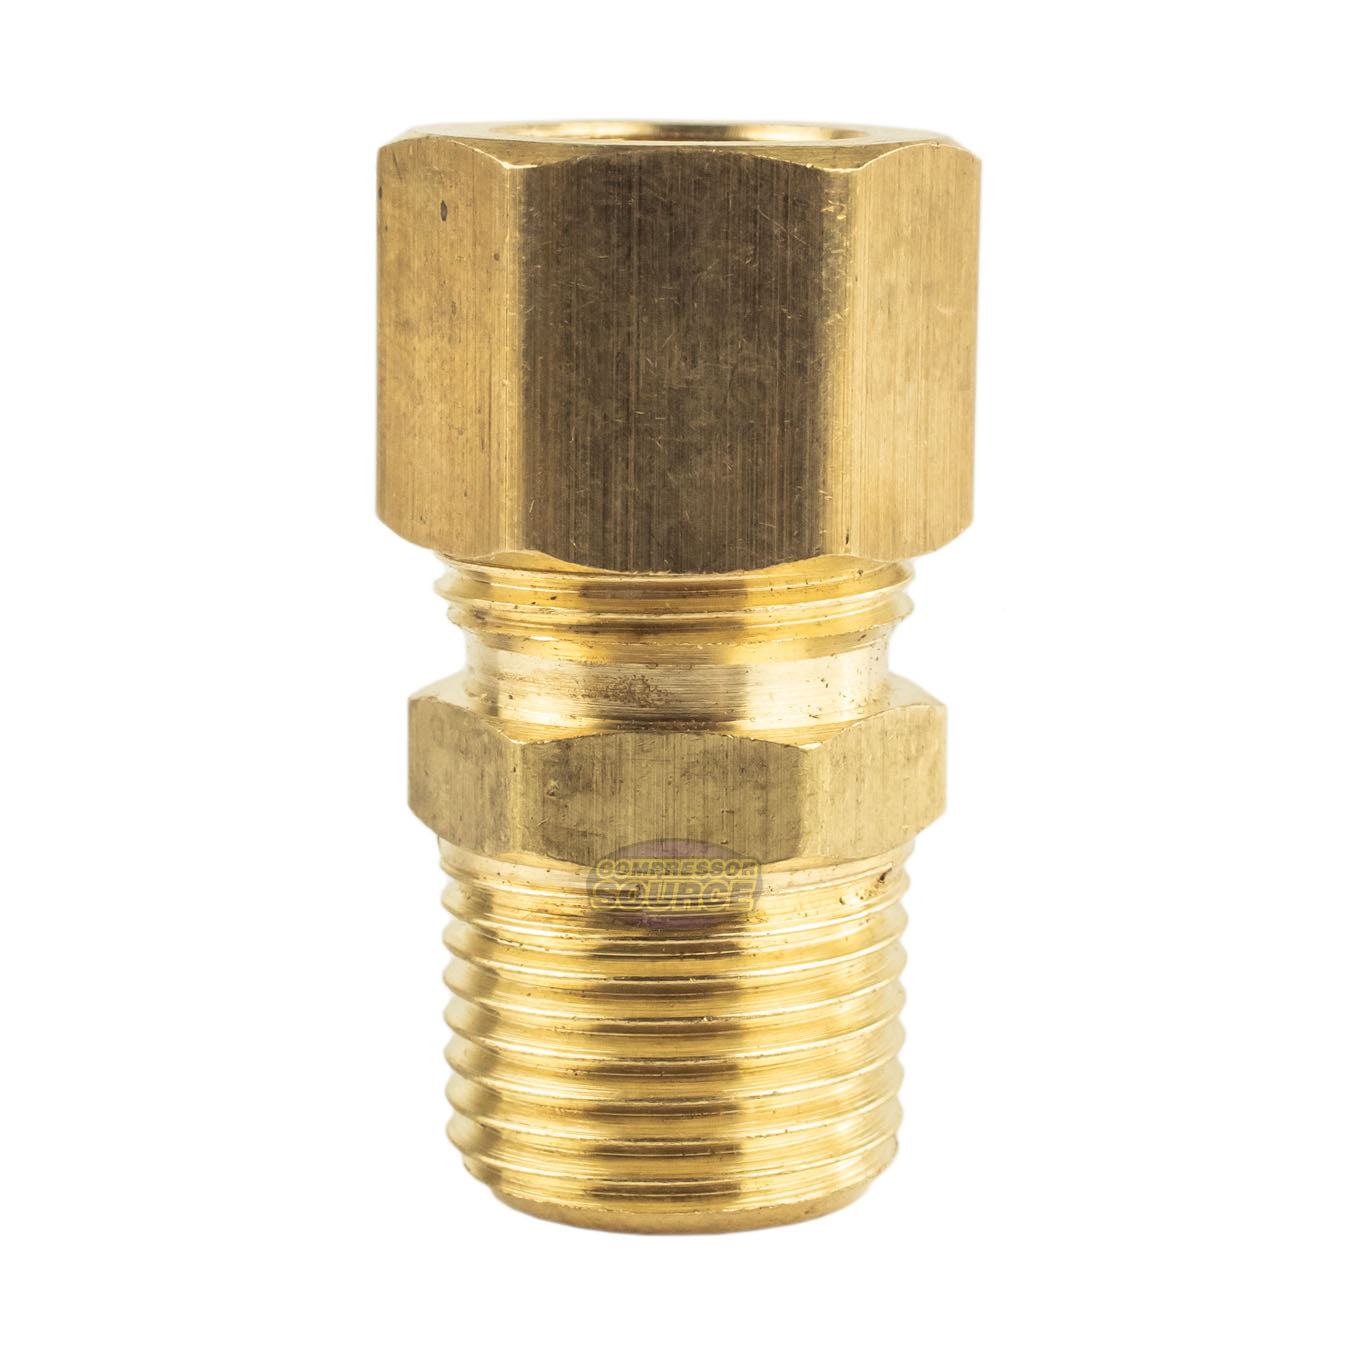 1/2" OD x 3/8" Male NPT Connector Brass Compression Fitting for 1/2" OD Tube